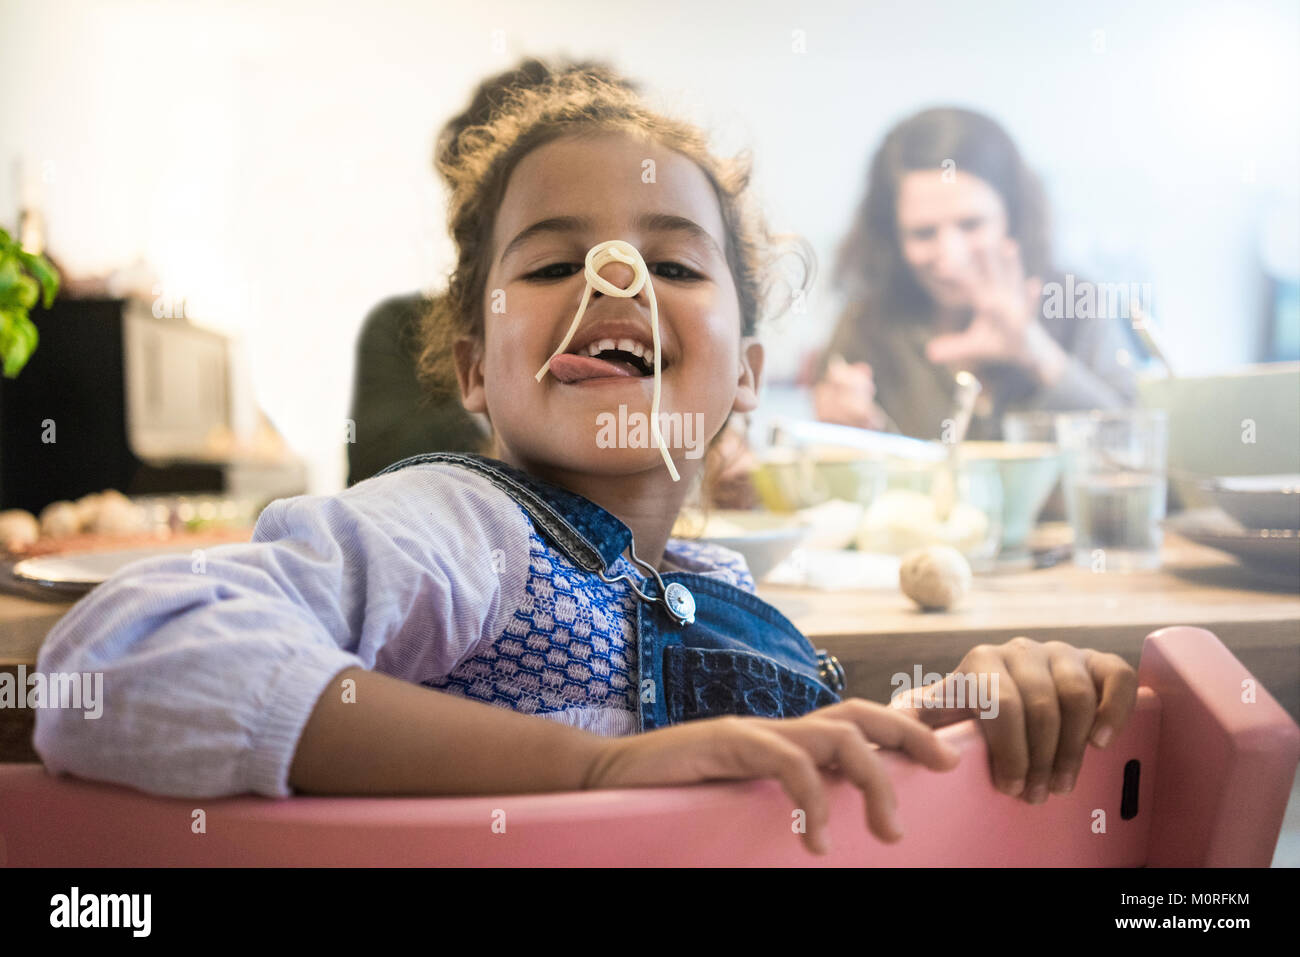 Portrait of a cheeky little girl eating spaghetti Stock Photo